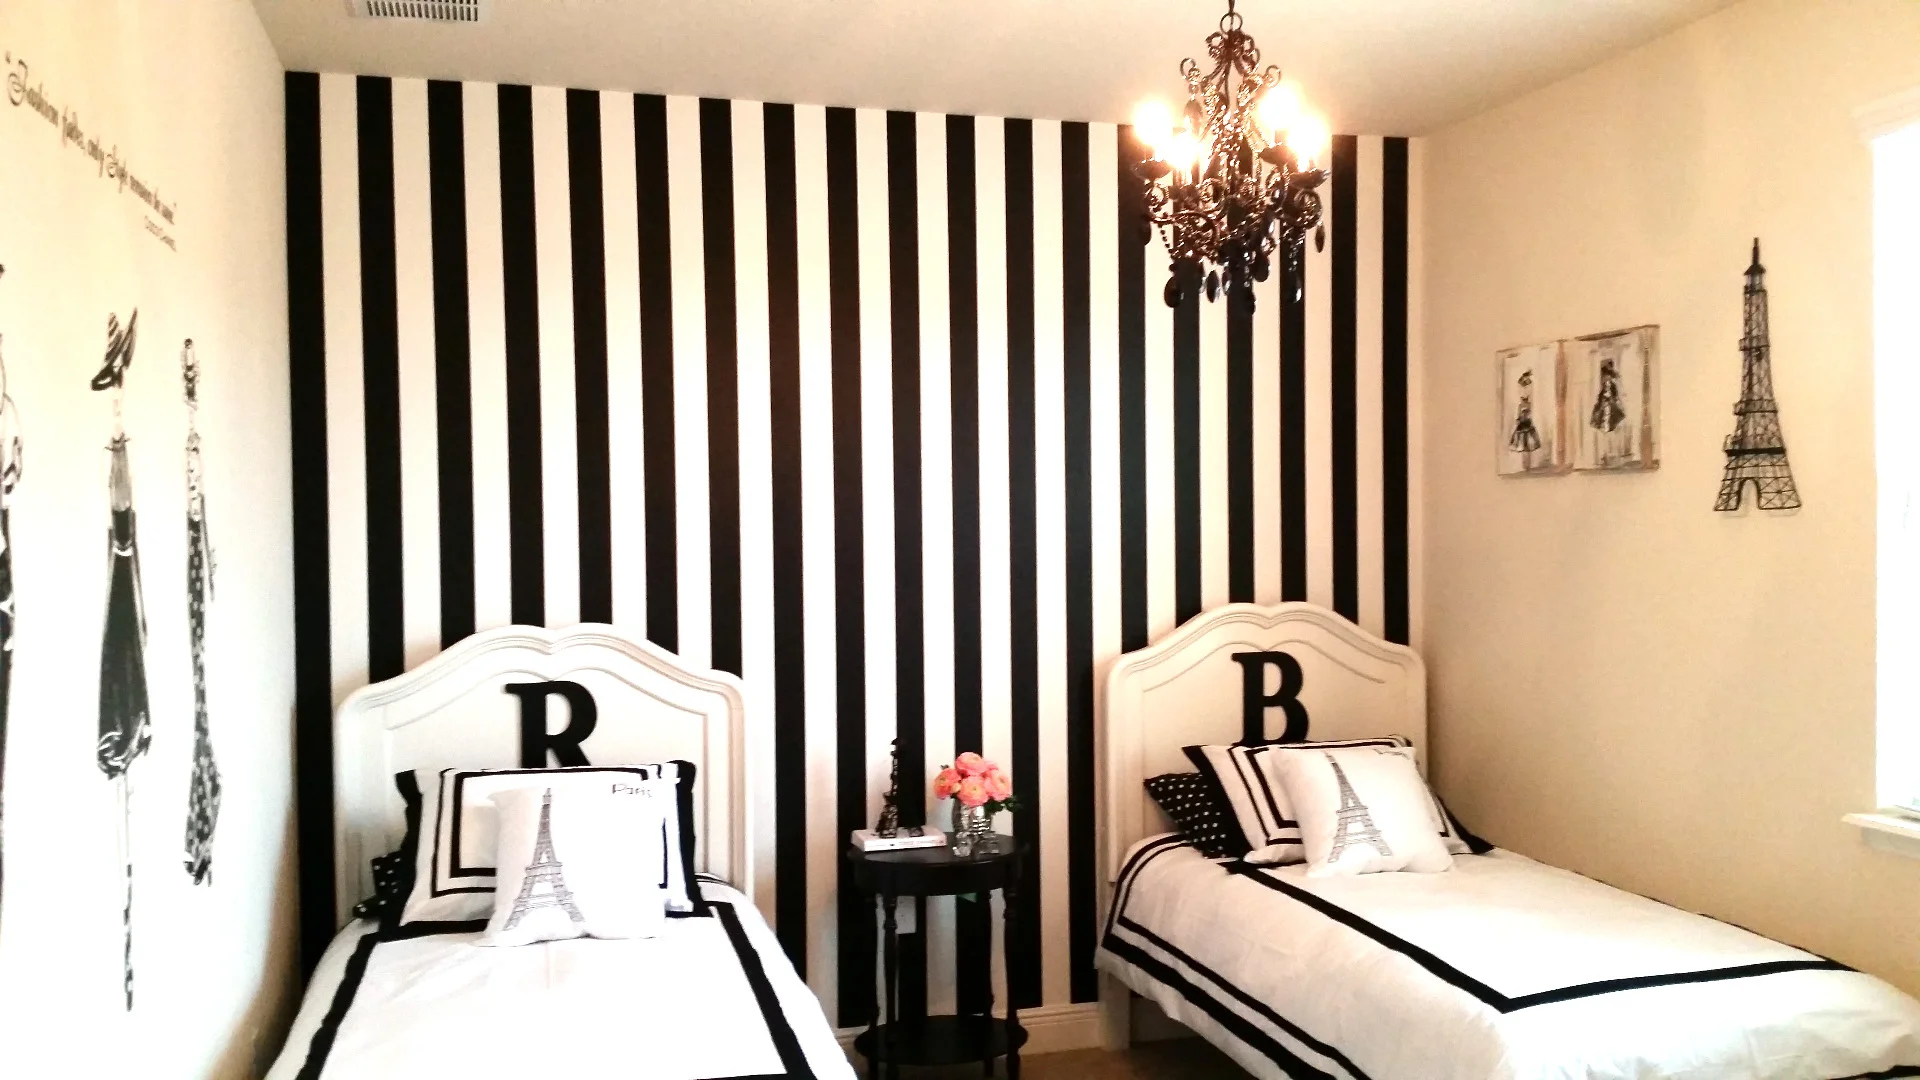 Double beds with Paris Themed Bedding before the white and black stripped wall plus black chandelier